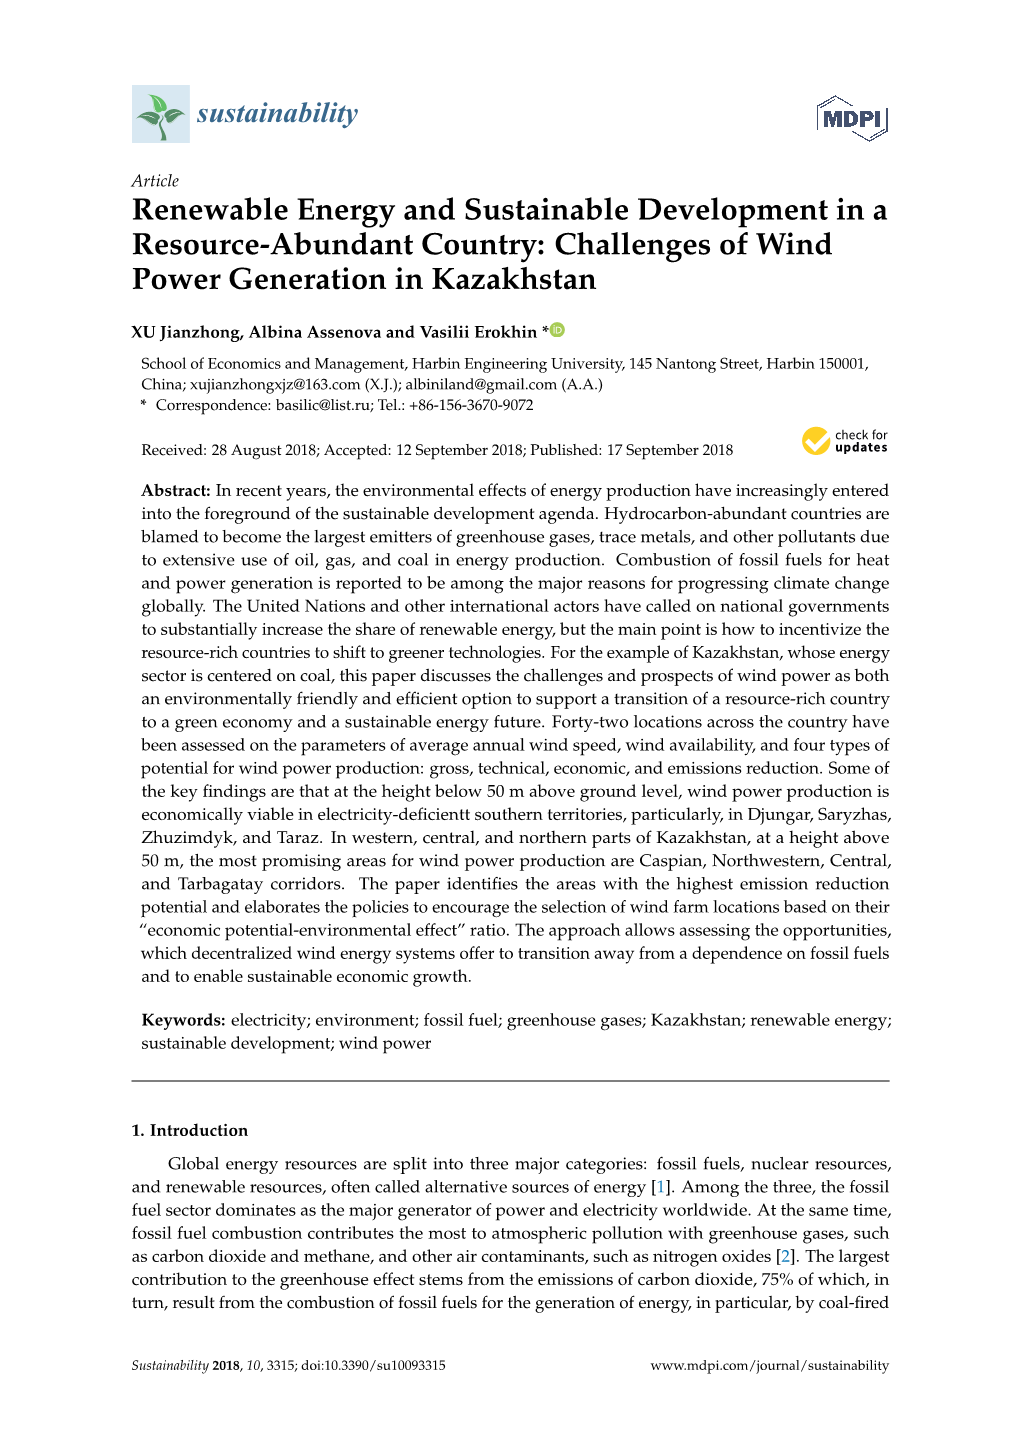 Renewable Energy and Sustainable Development in a Resource-Abundant Country: Challenges of Wind Power Generation in Kazakhstan